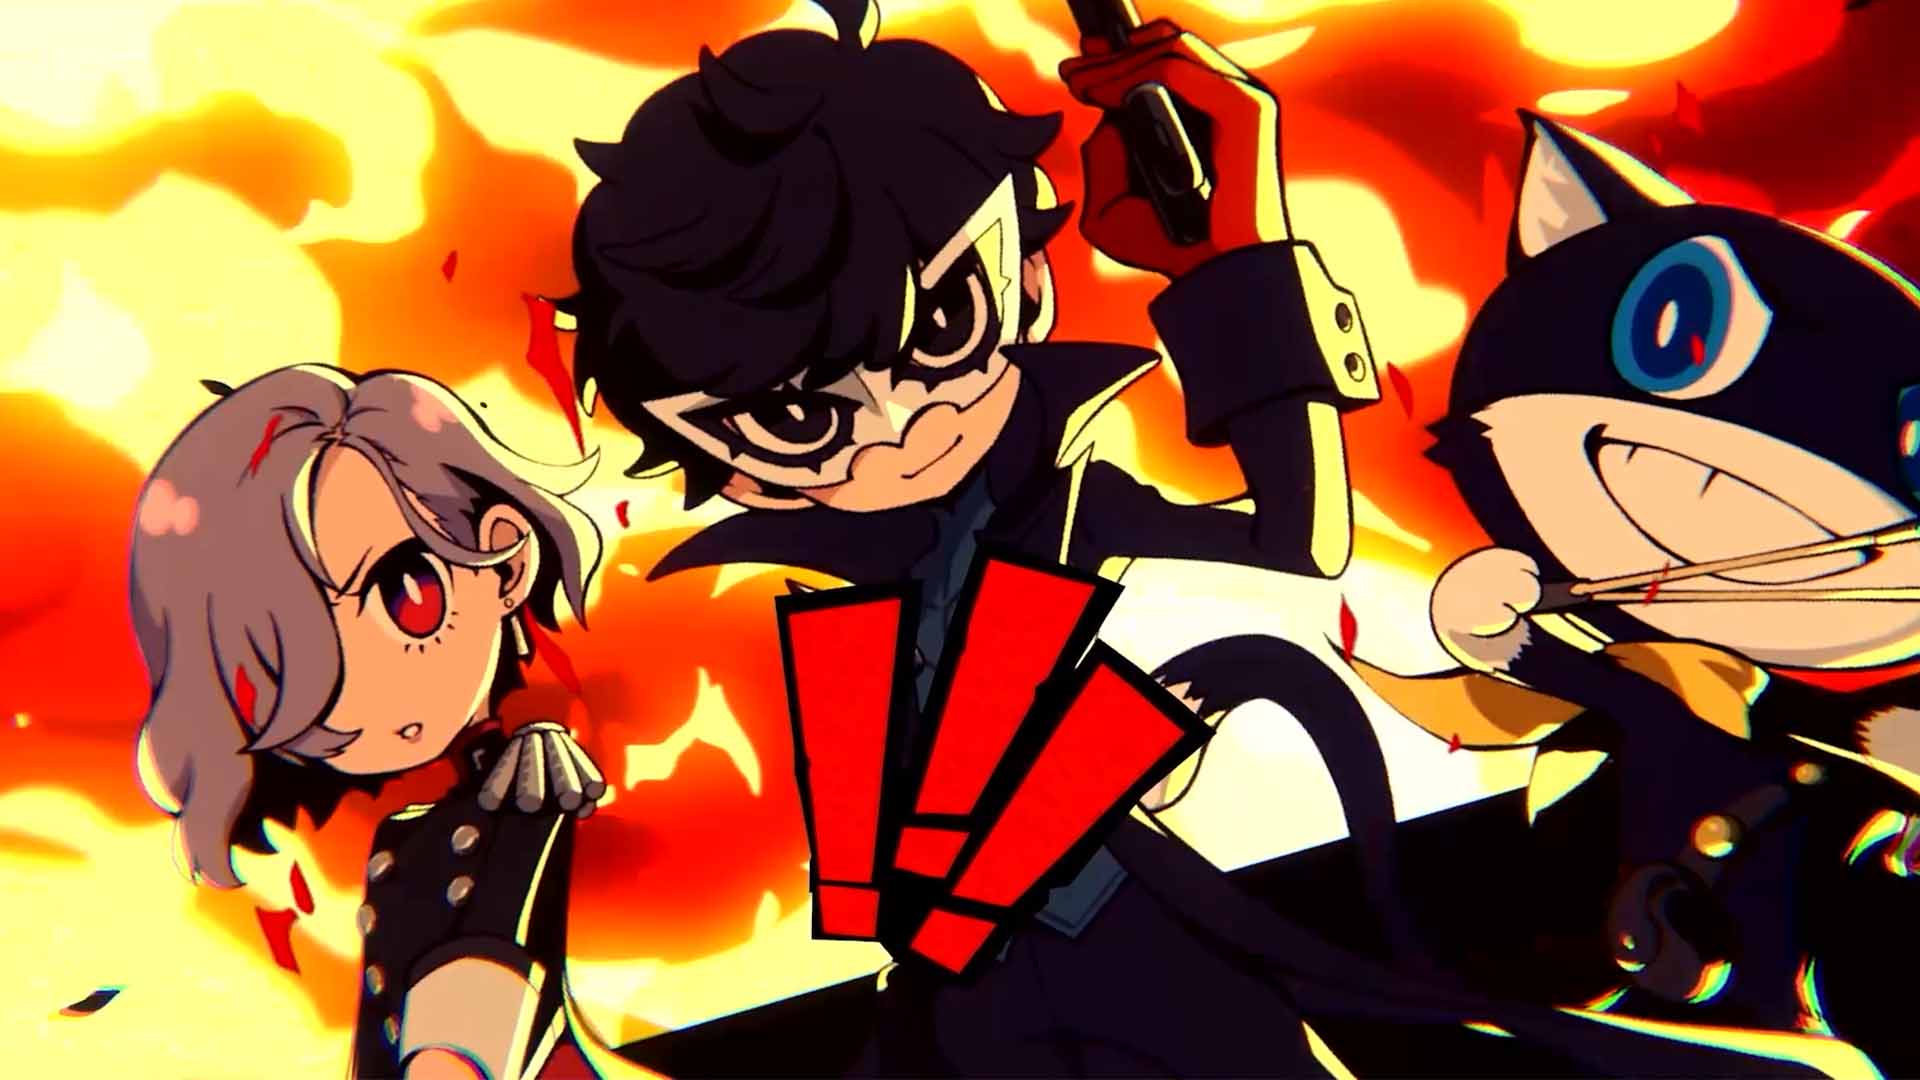 Persona 5 Royal New Footage Shows Combination Attacks, New Location